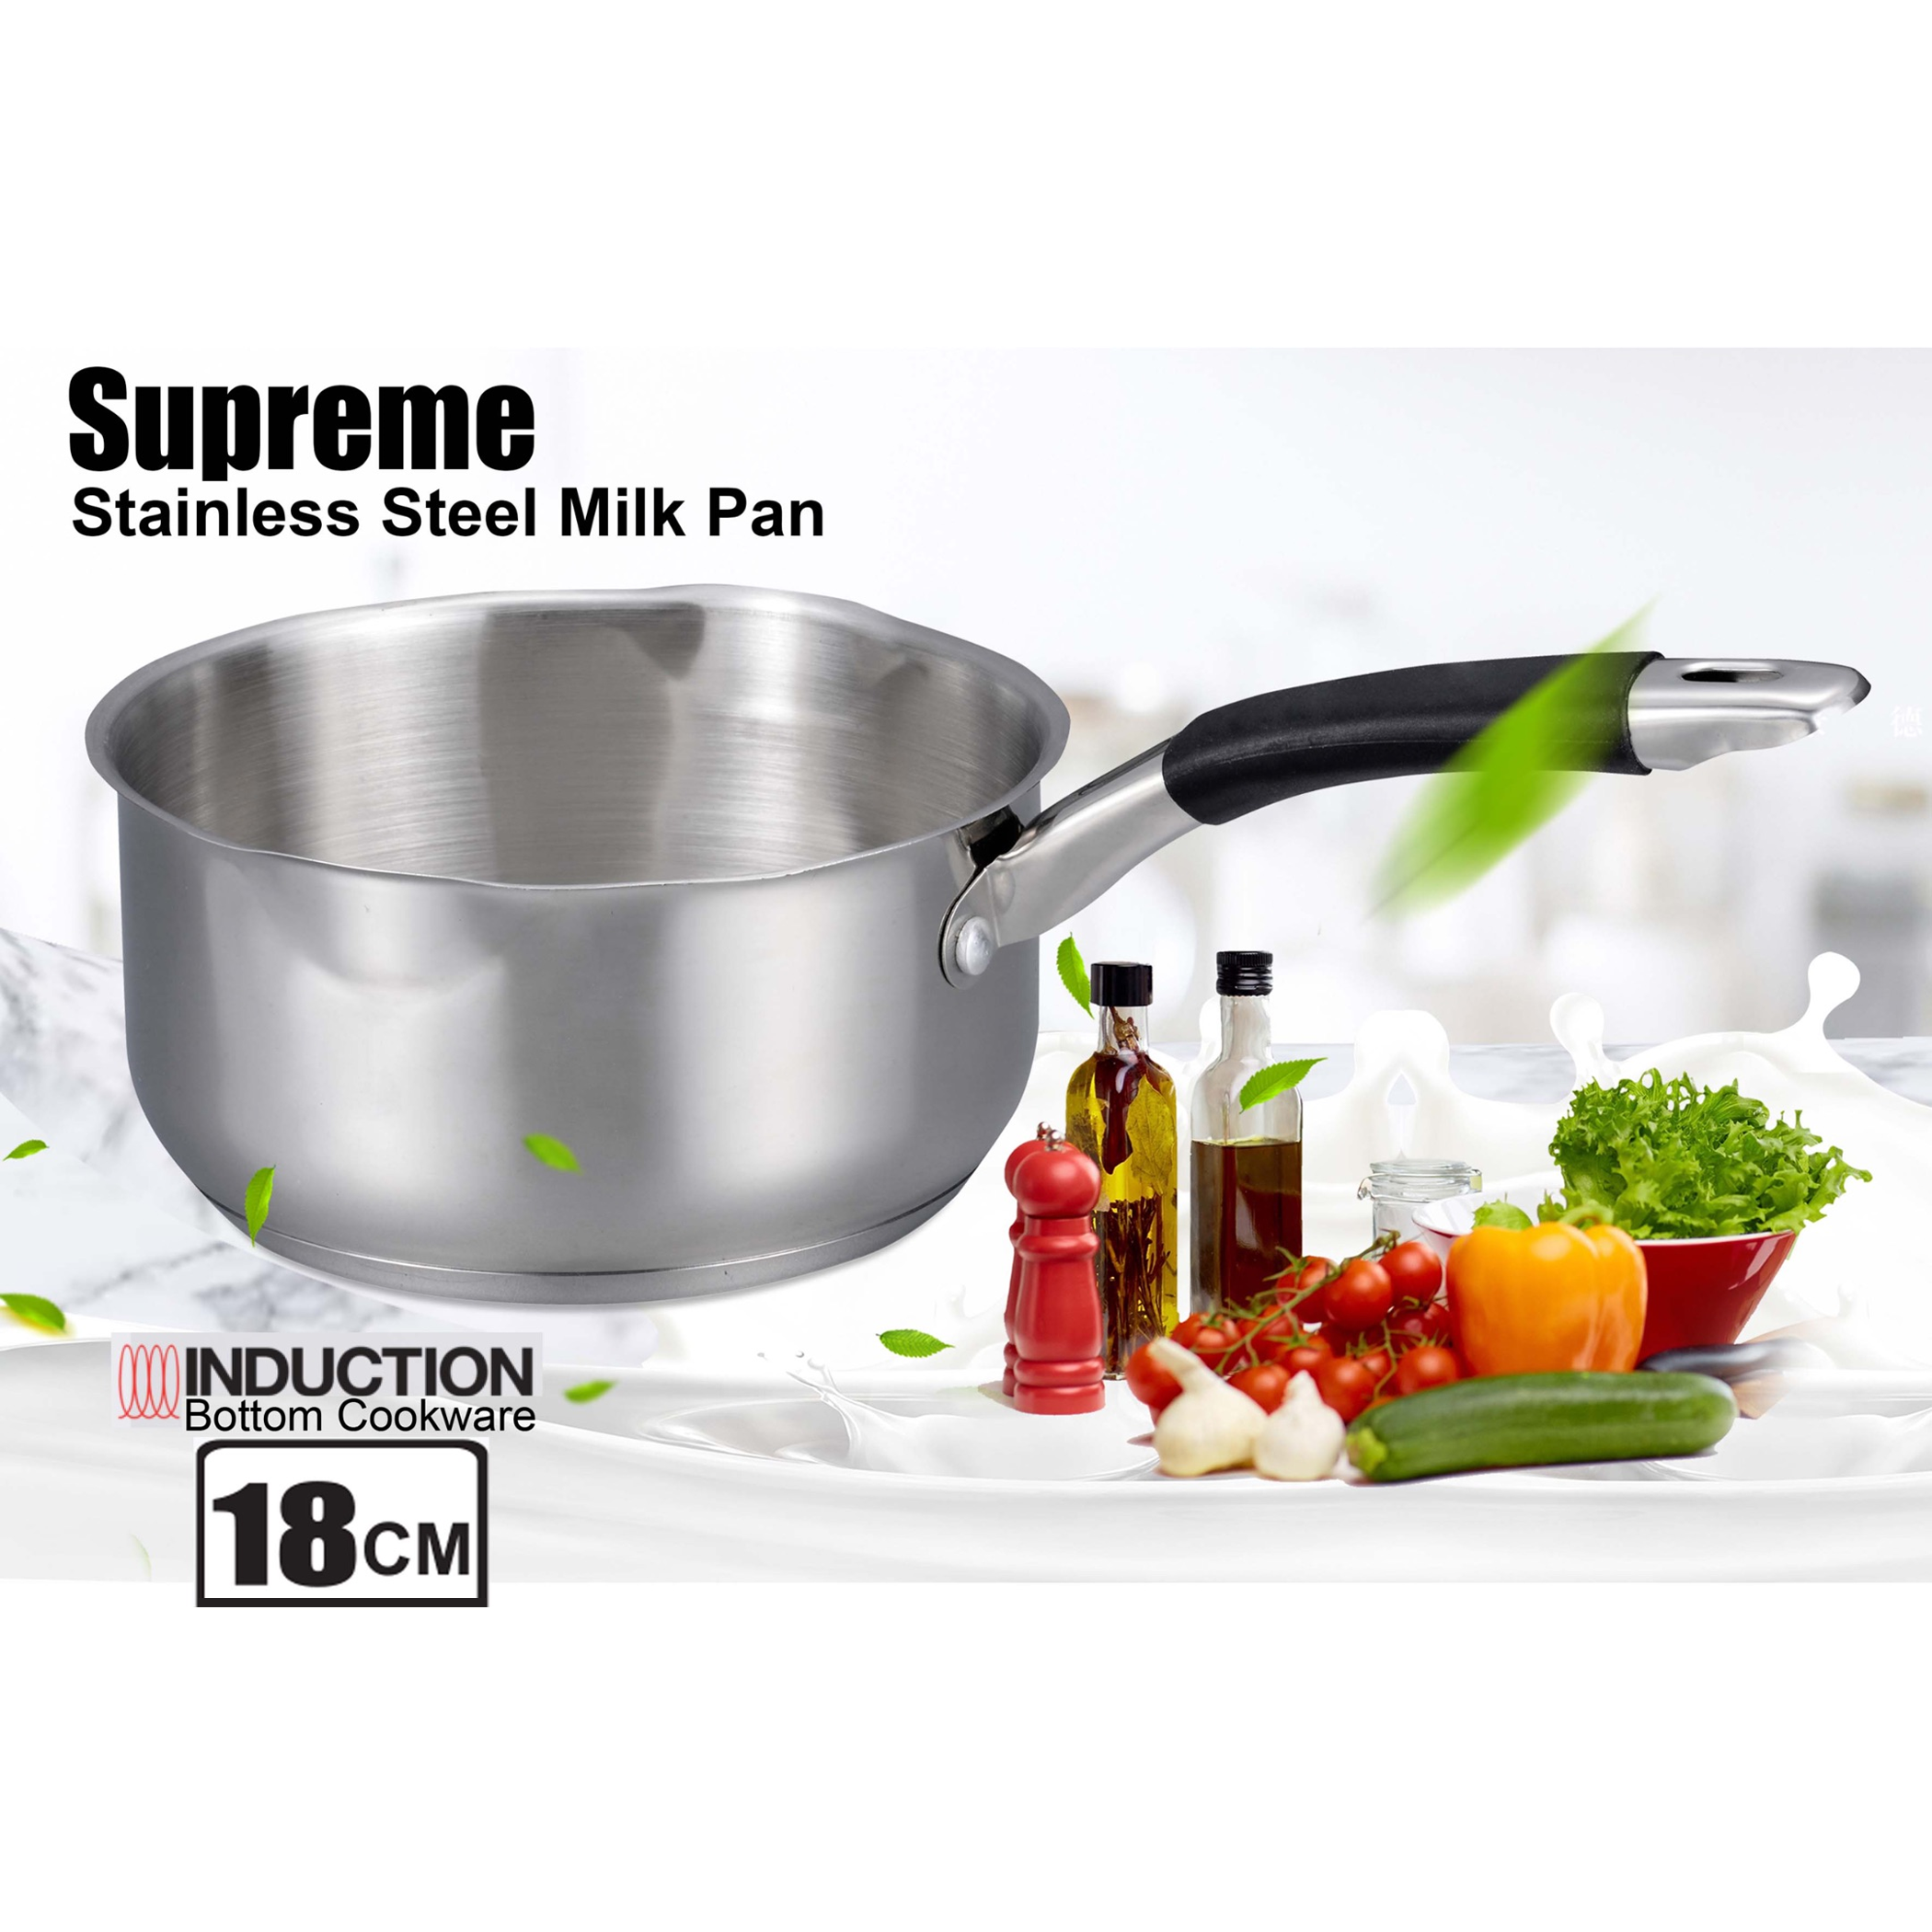 Supreme Stainless Steel - Induction Base Milk Pan - 18 cm